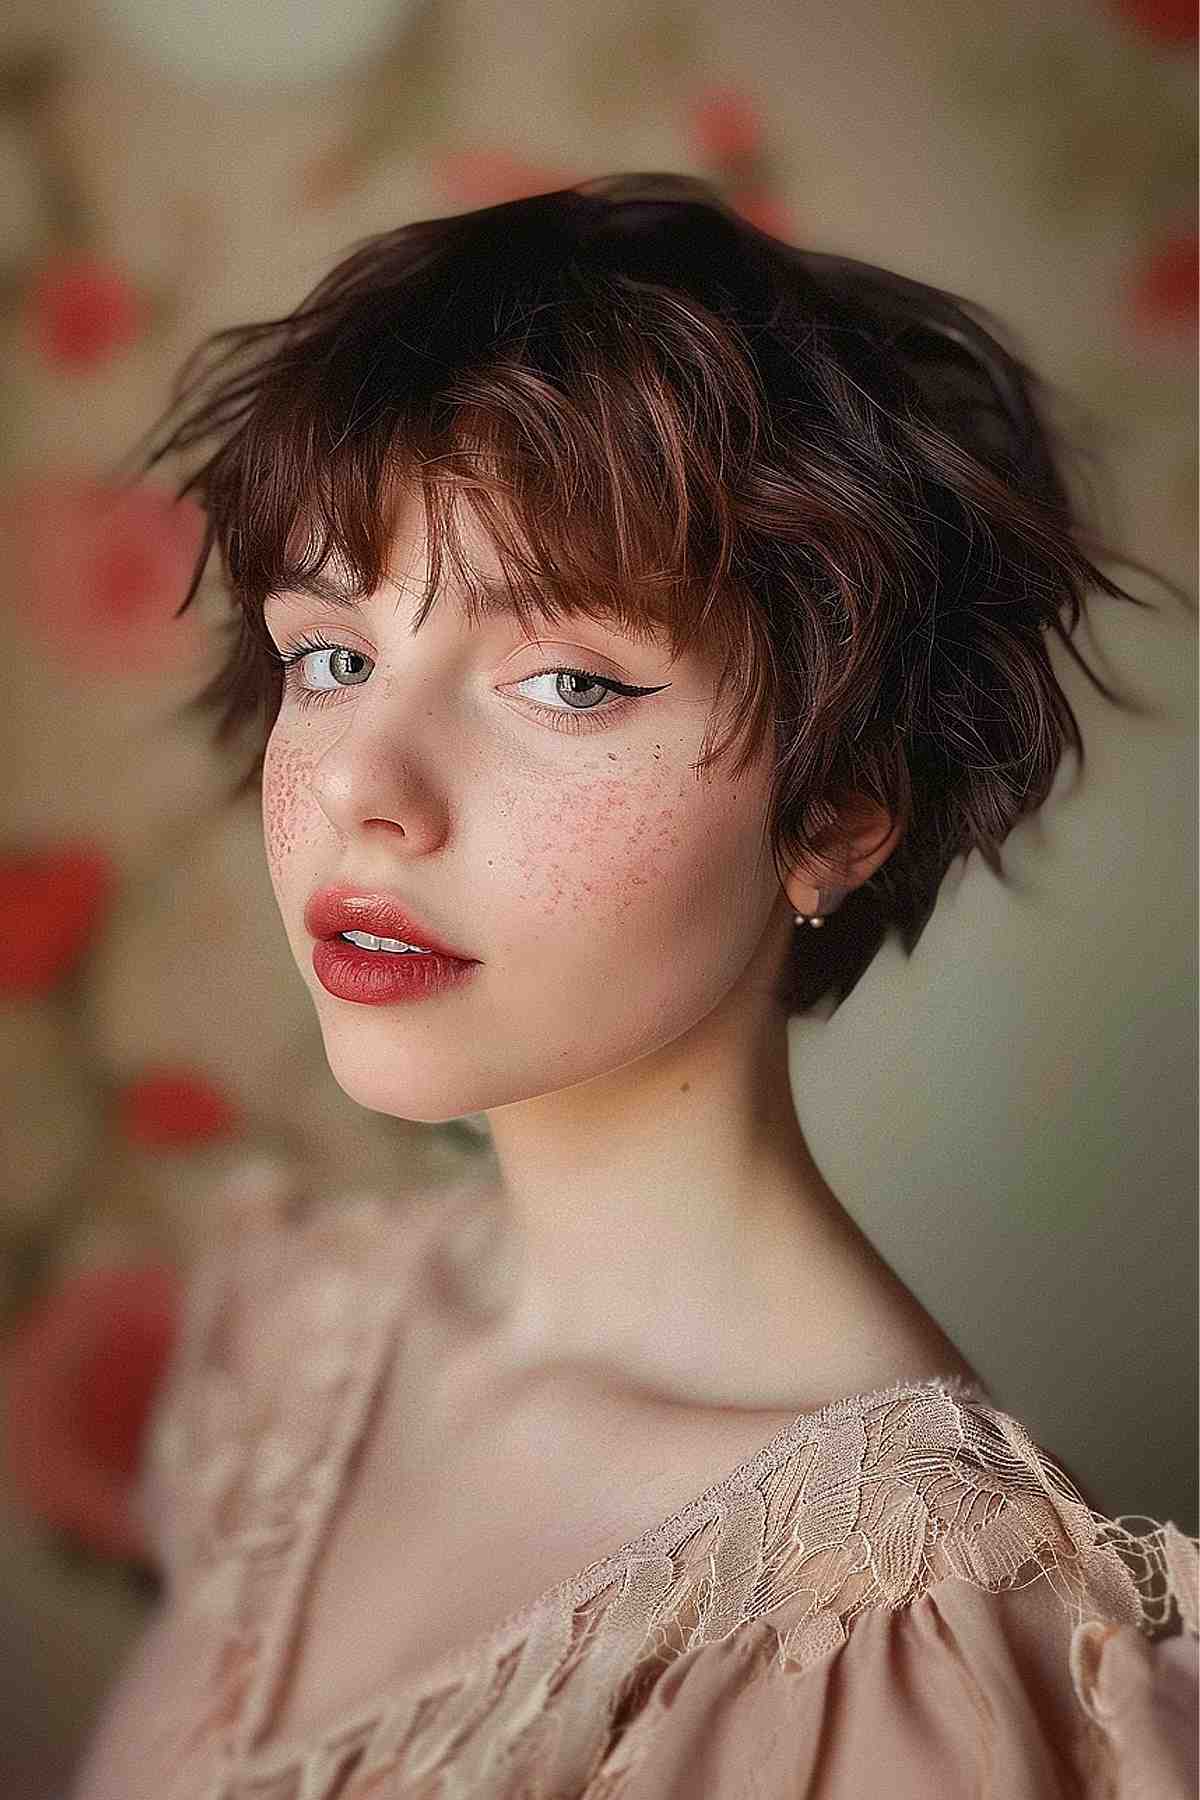 Textured elf crop haircut with choppy layers and uneven fringe in warm brown with subtle highlights.